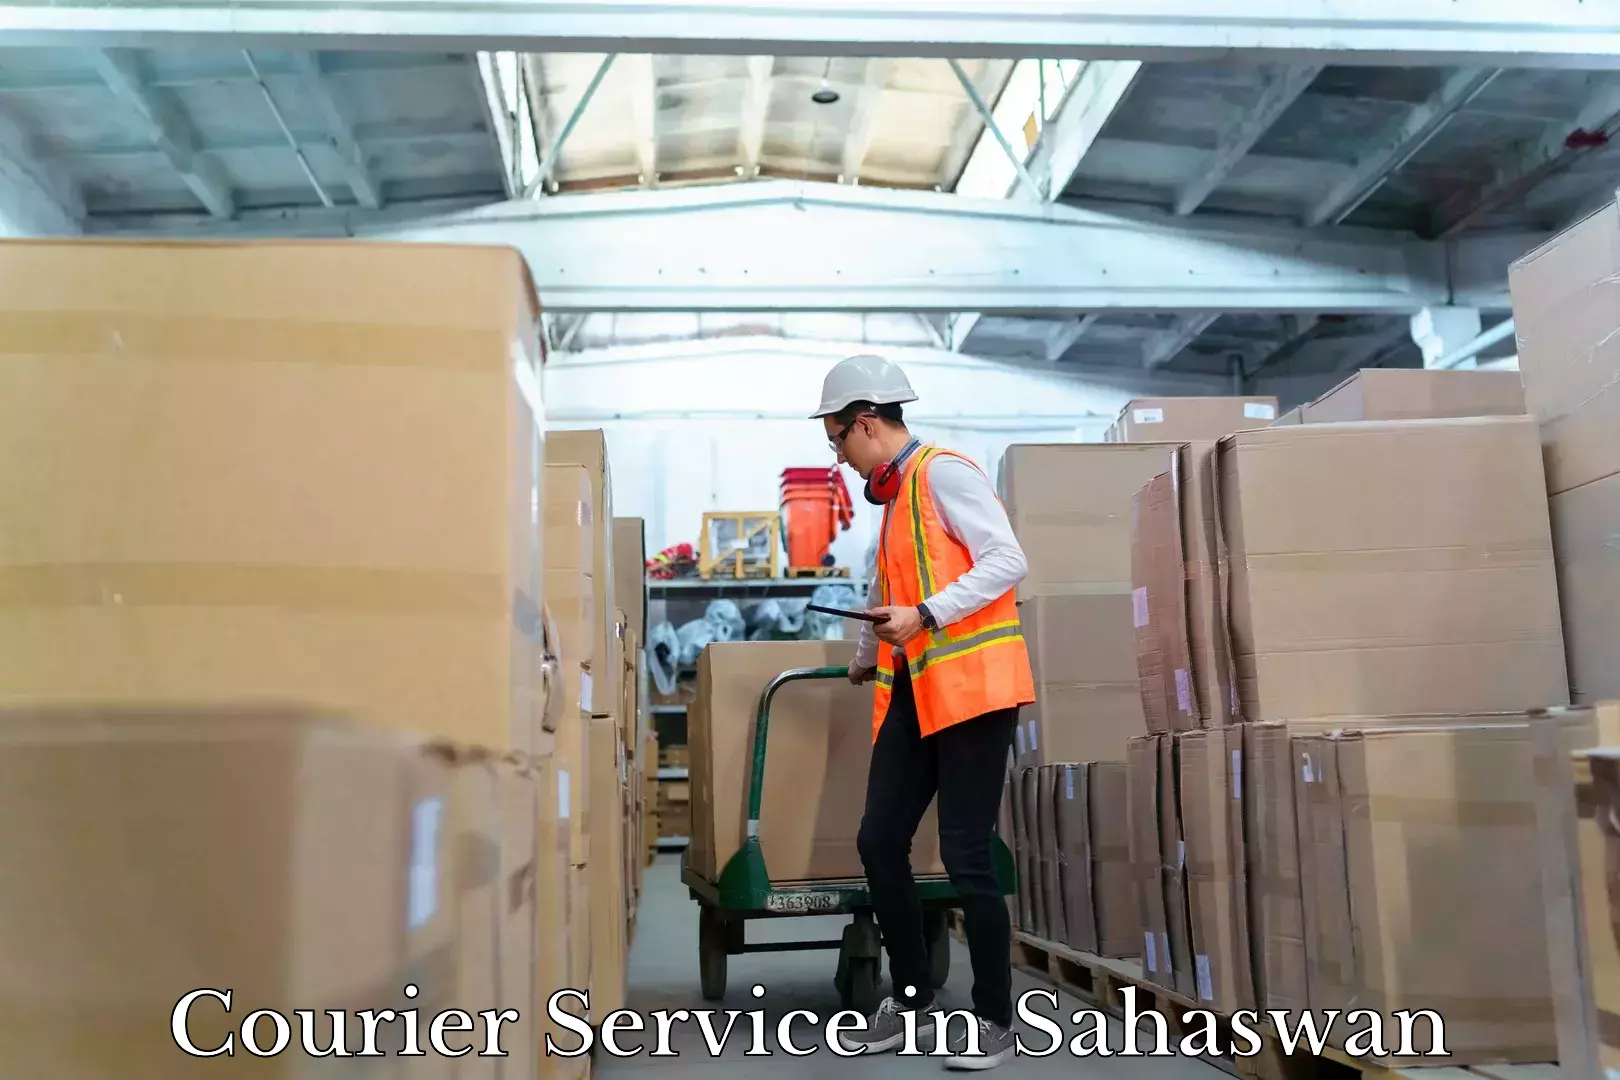 Efficient parcel delivery in Sahaswan